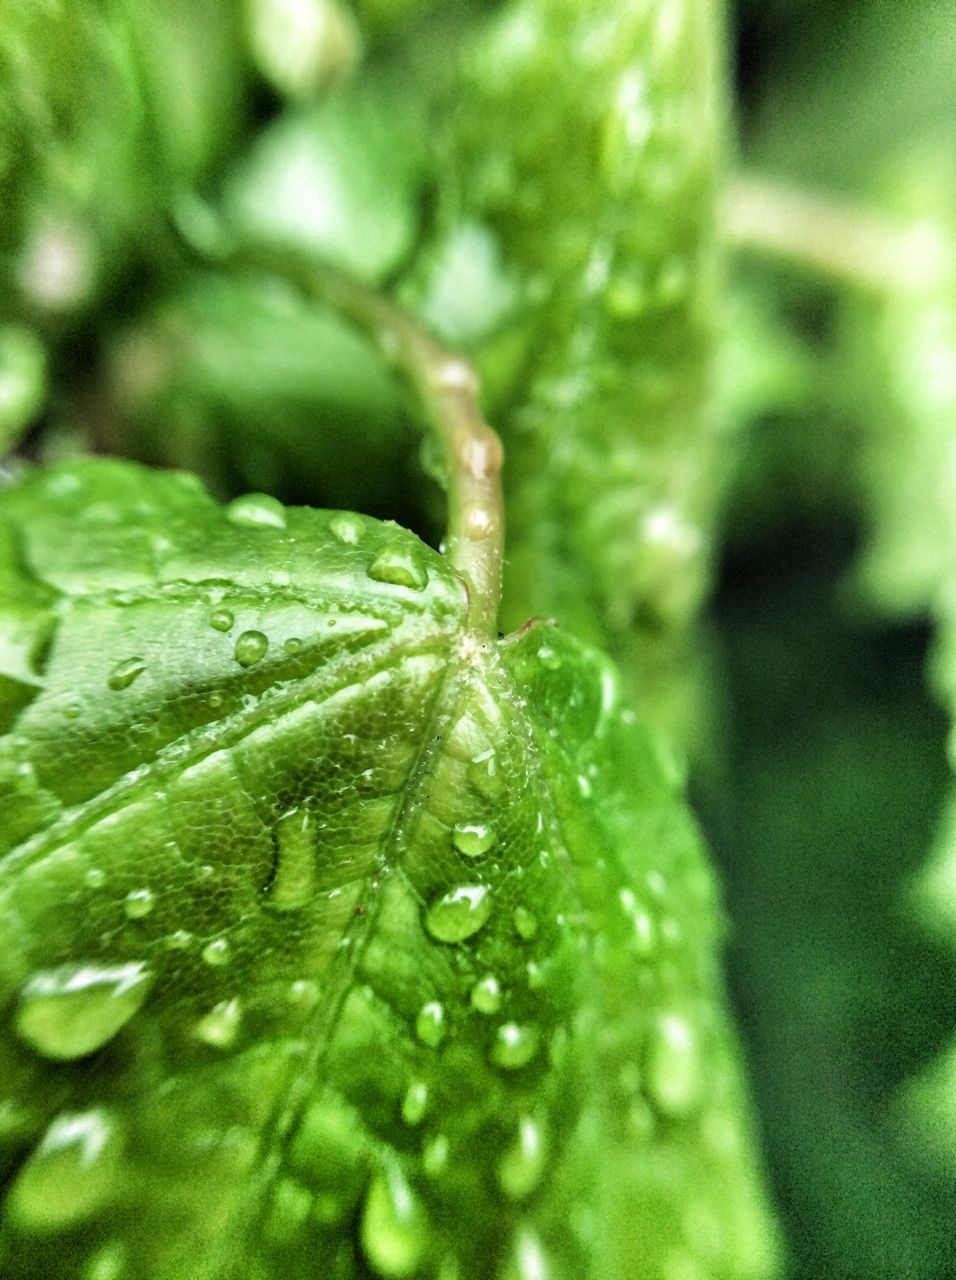 drop, water, wet, leaf, green color, close-up, dew, growth, nature, selective focus, freshness, focus on foreground, leaf vein, raindrop, plant, beauty in nature, fragility, water drop, rain, droplet